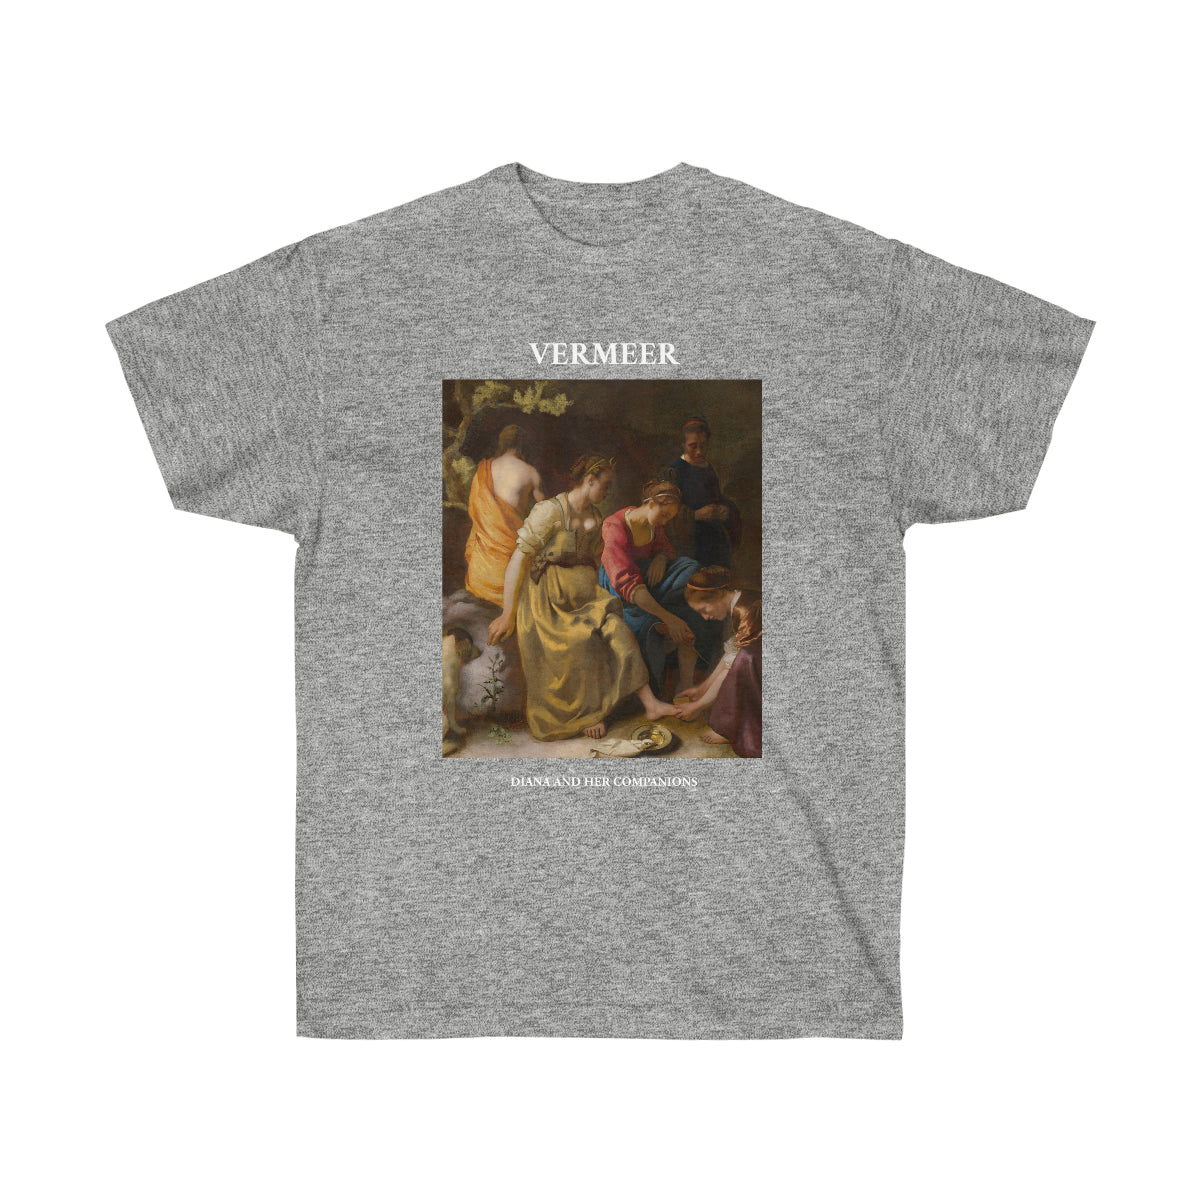 Vermeer Diana and Her Companions T-shirt